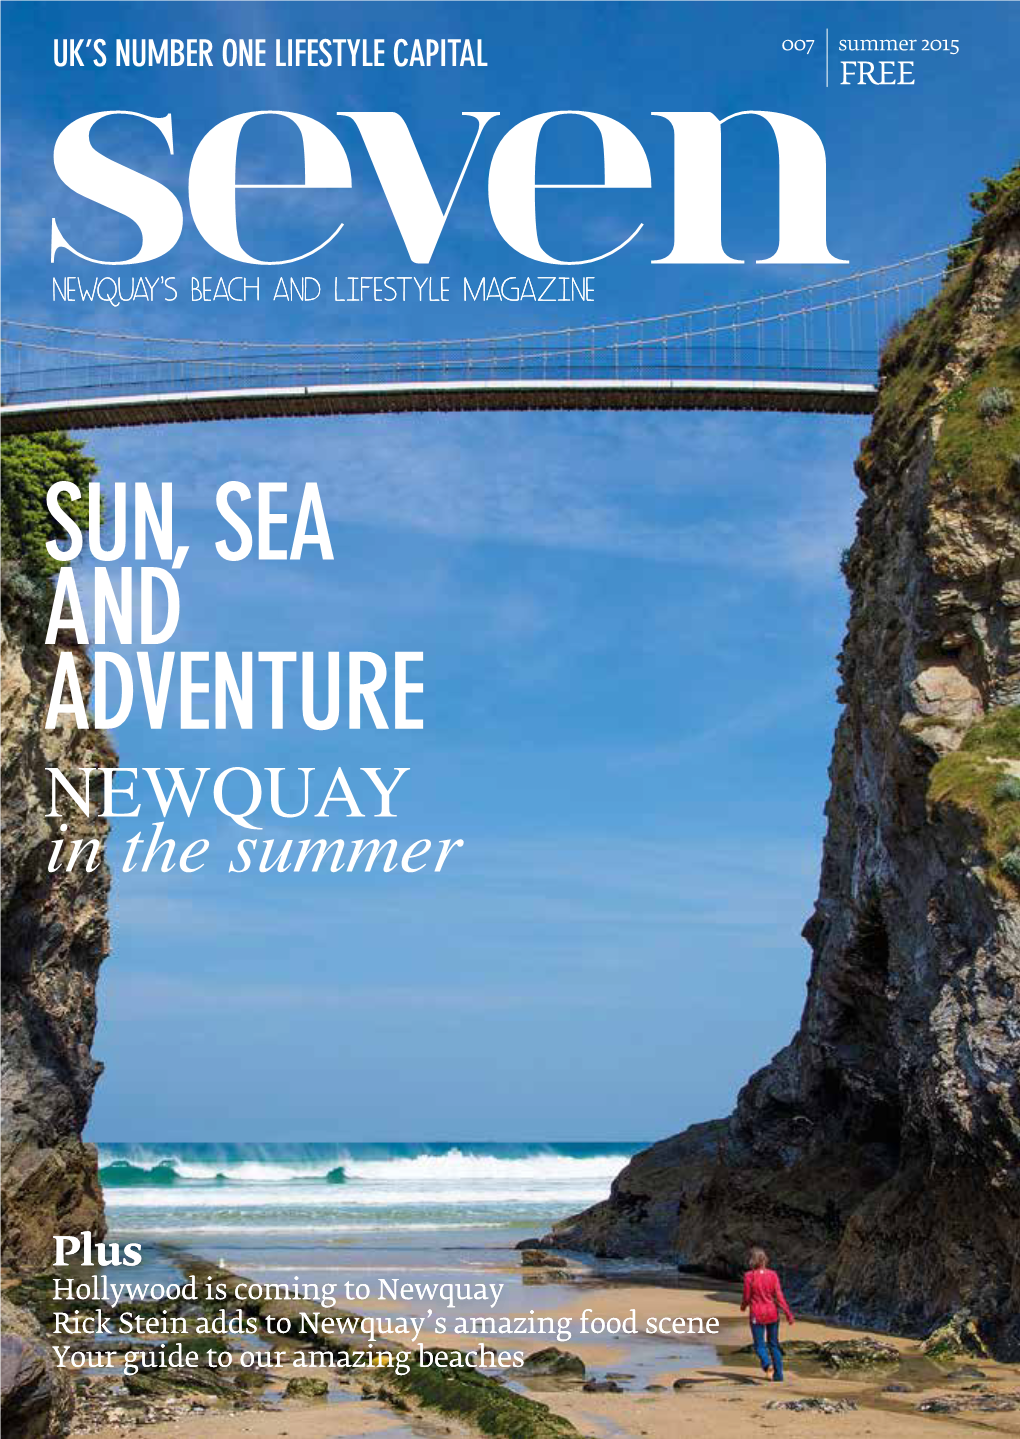 SUN, SEA and ADVENTURE NEWQUAY in the Summer